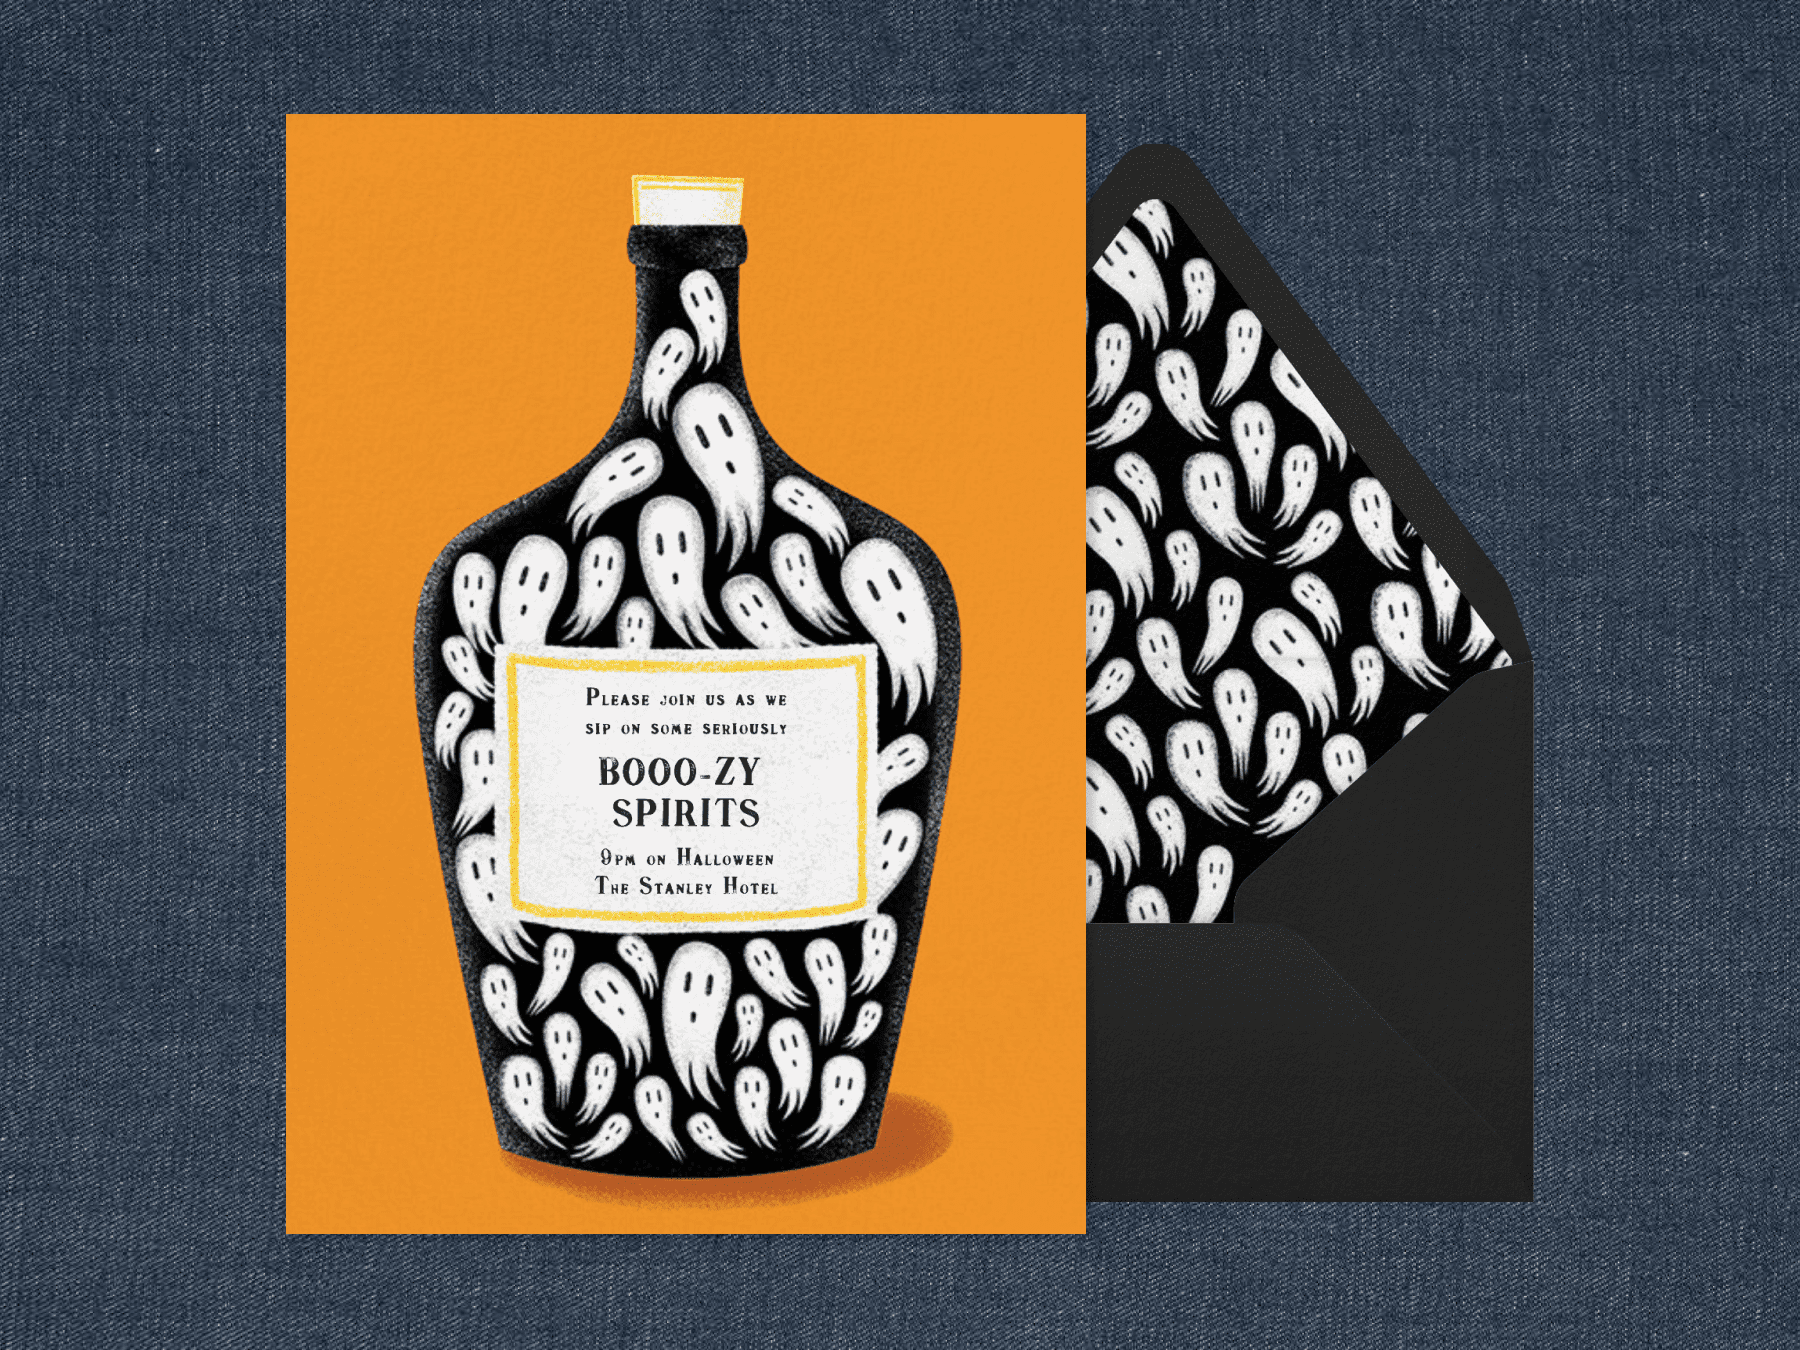 An orange Halloween invitation featuring an illustration of a bottle full of ghosts.